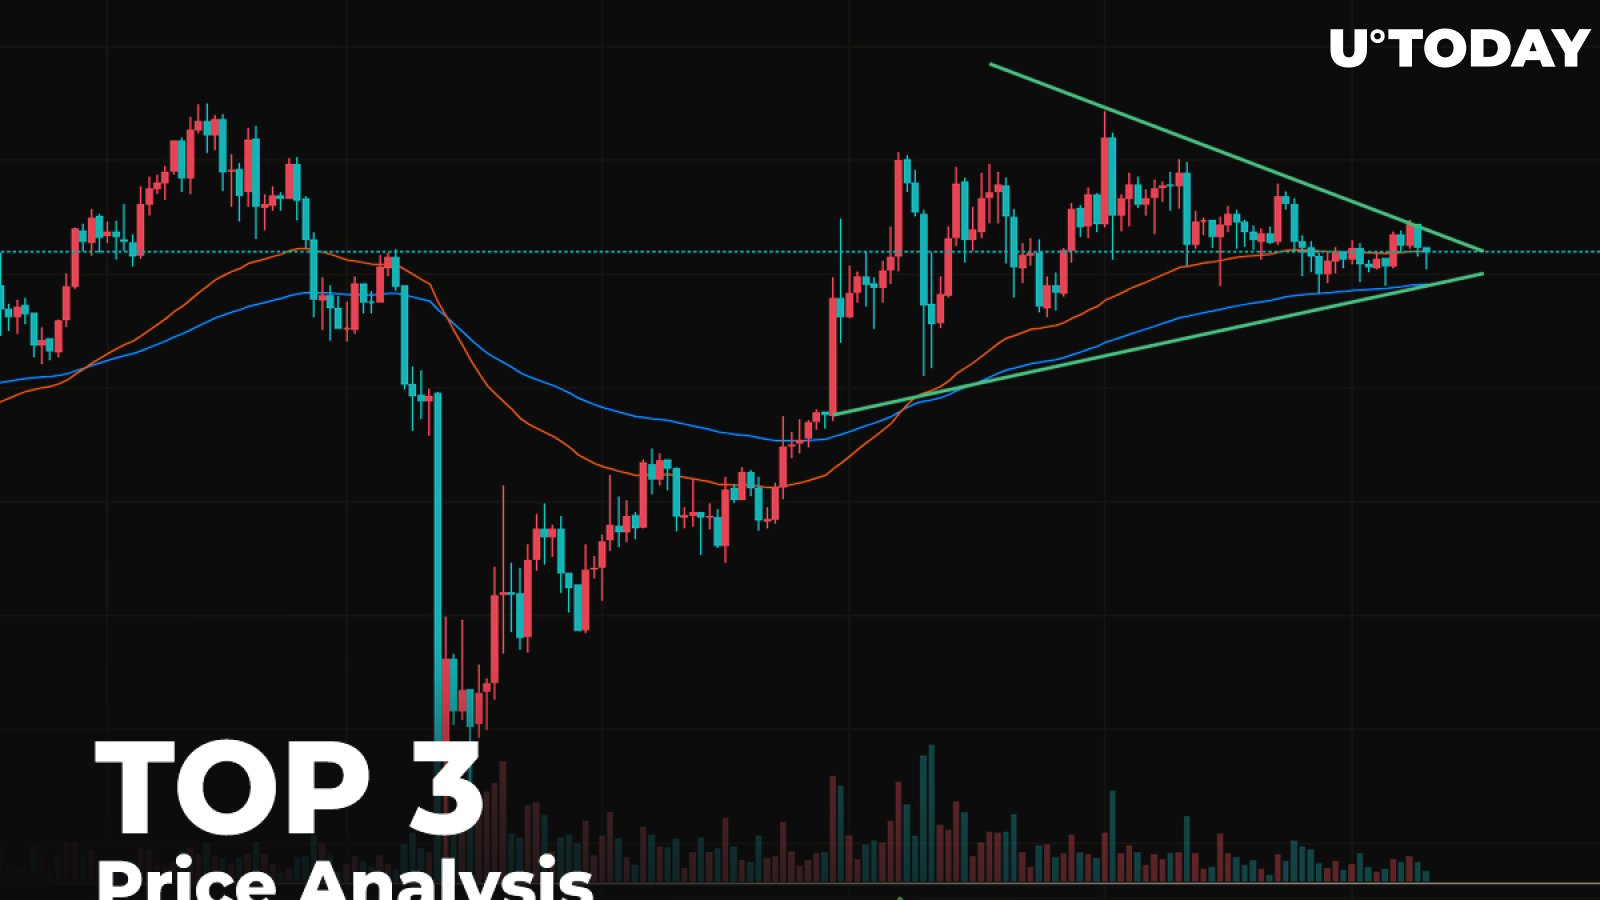 TOP 3 Price Analysis: BTC, ETH, XRP — Is Current Drop Correction or Start of Prolonged Decline?